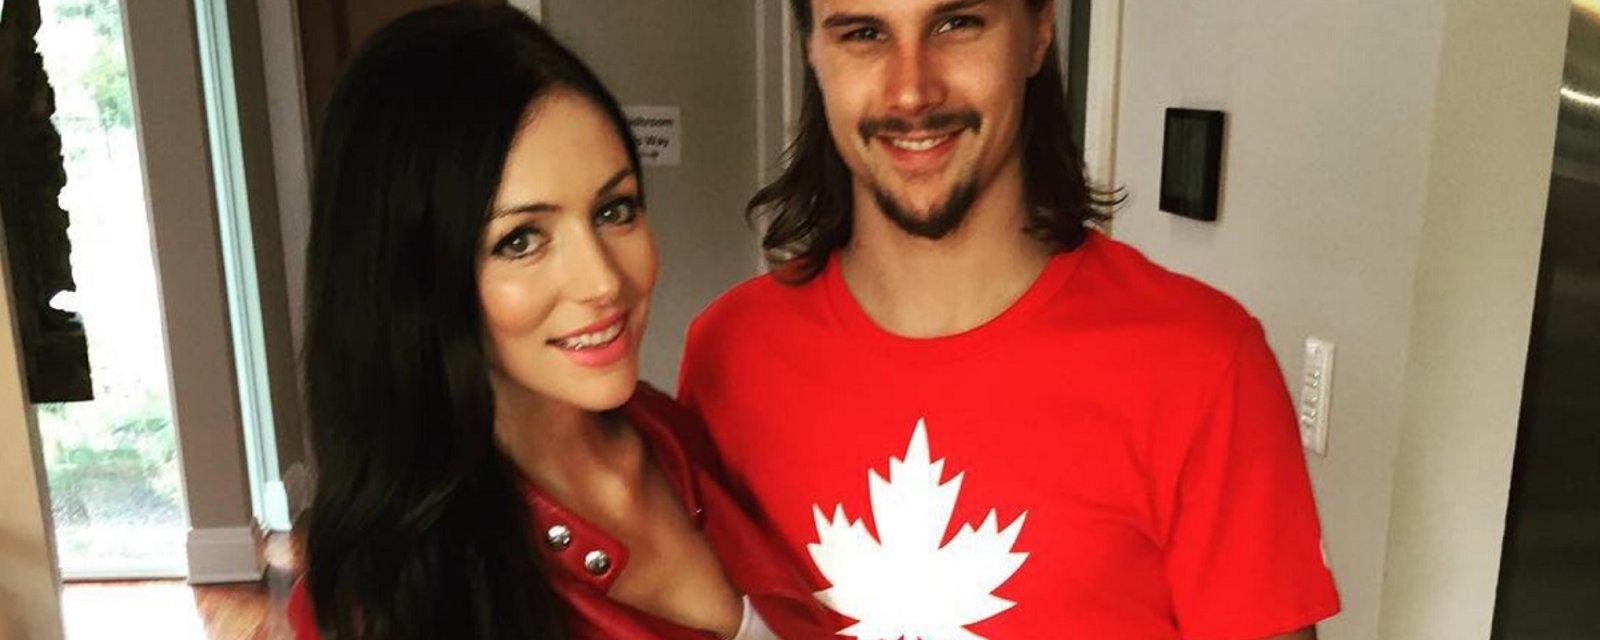 Erik Karlsson and his wife dress up as Darth Vader and a sexy Princess Leia.